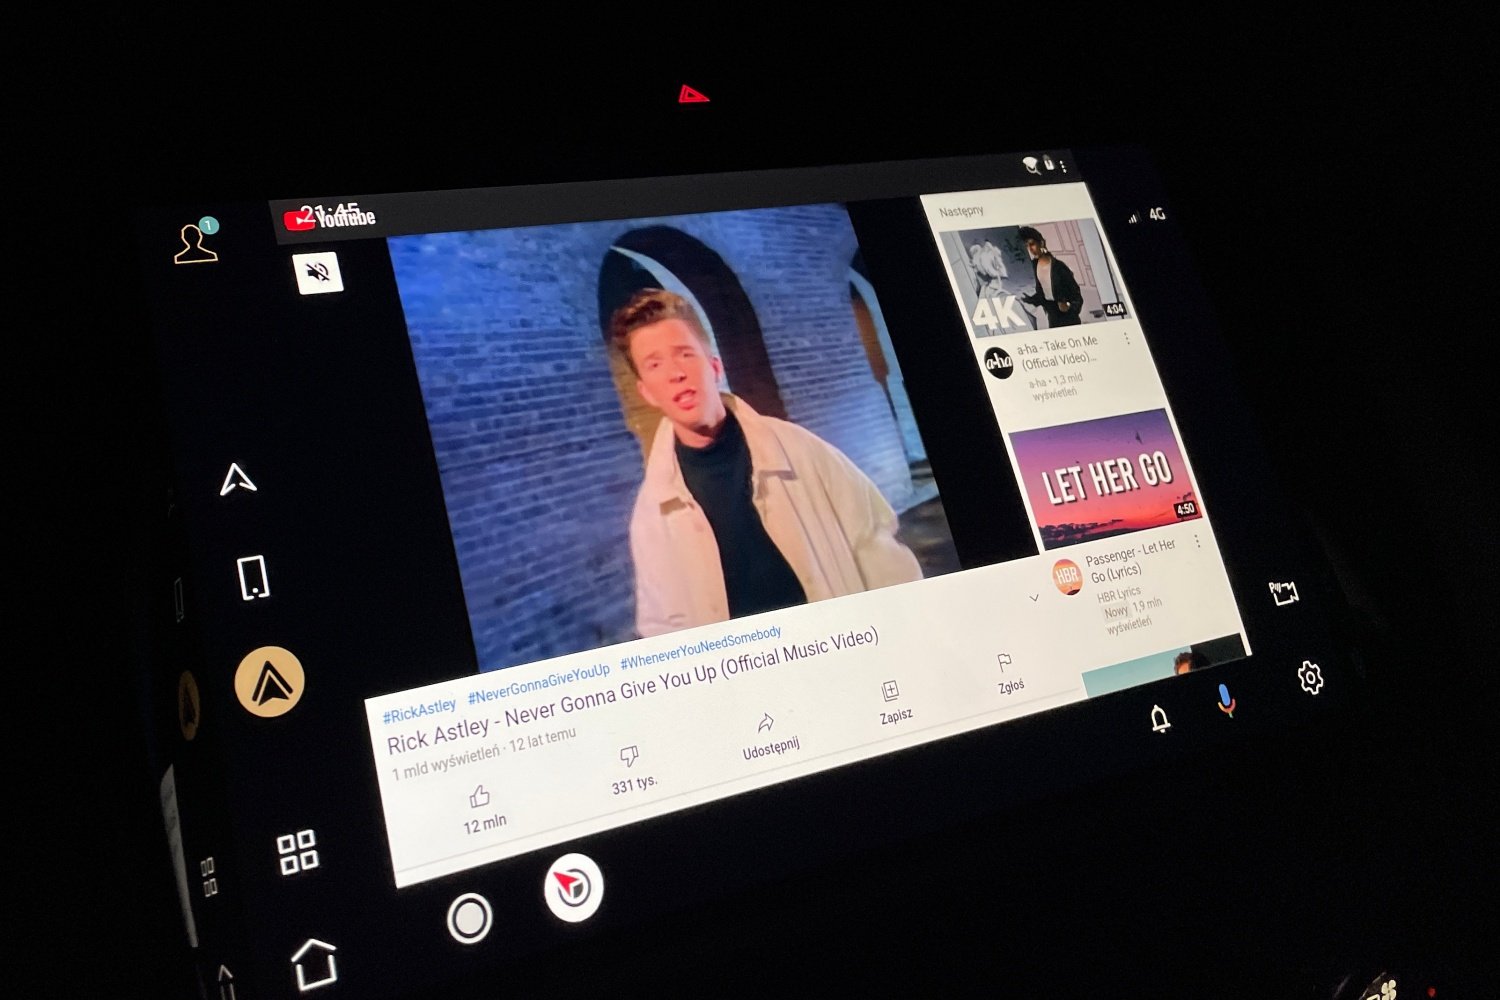 Android Auto Never Gonna Give You Up